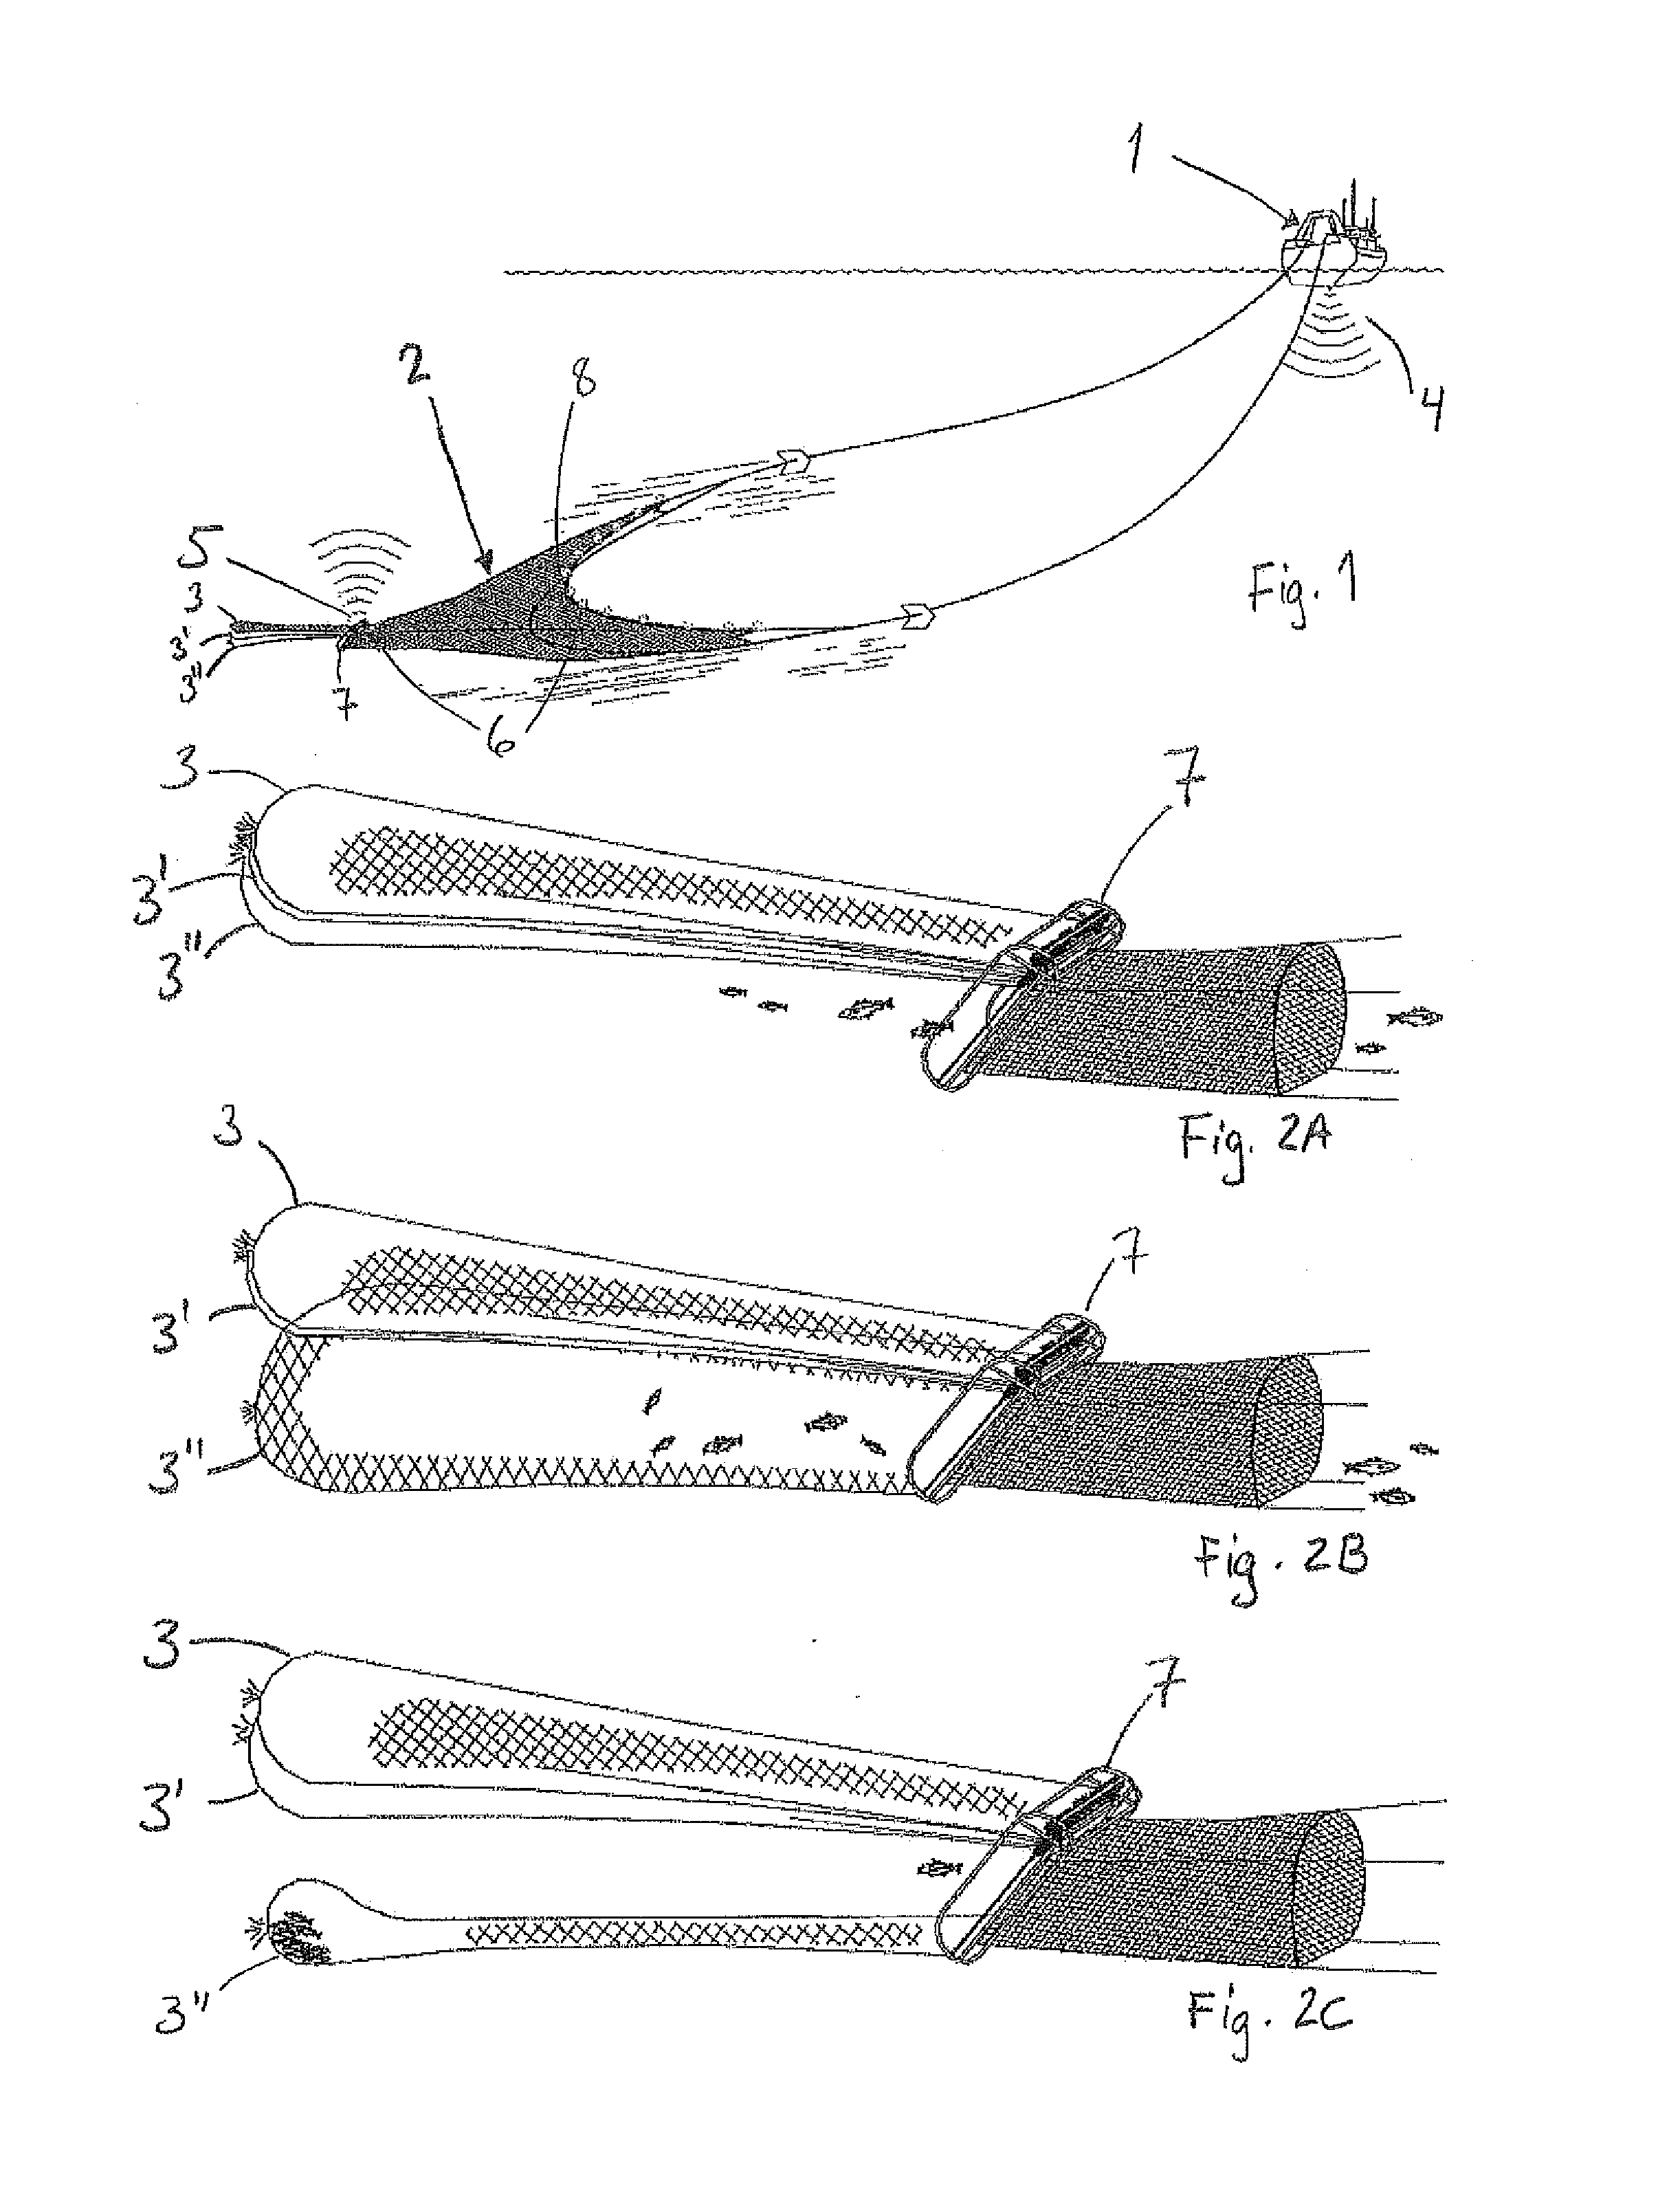 System and method for screening fish during fishing